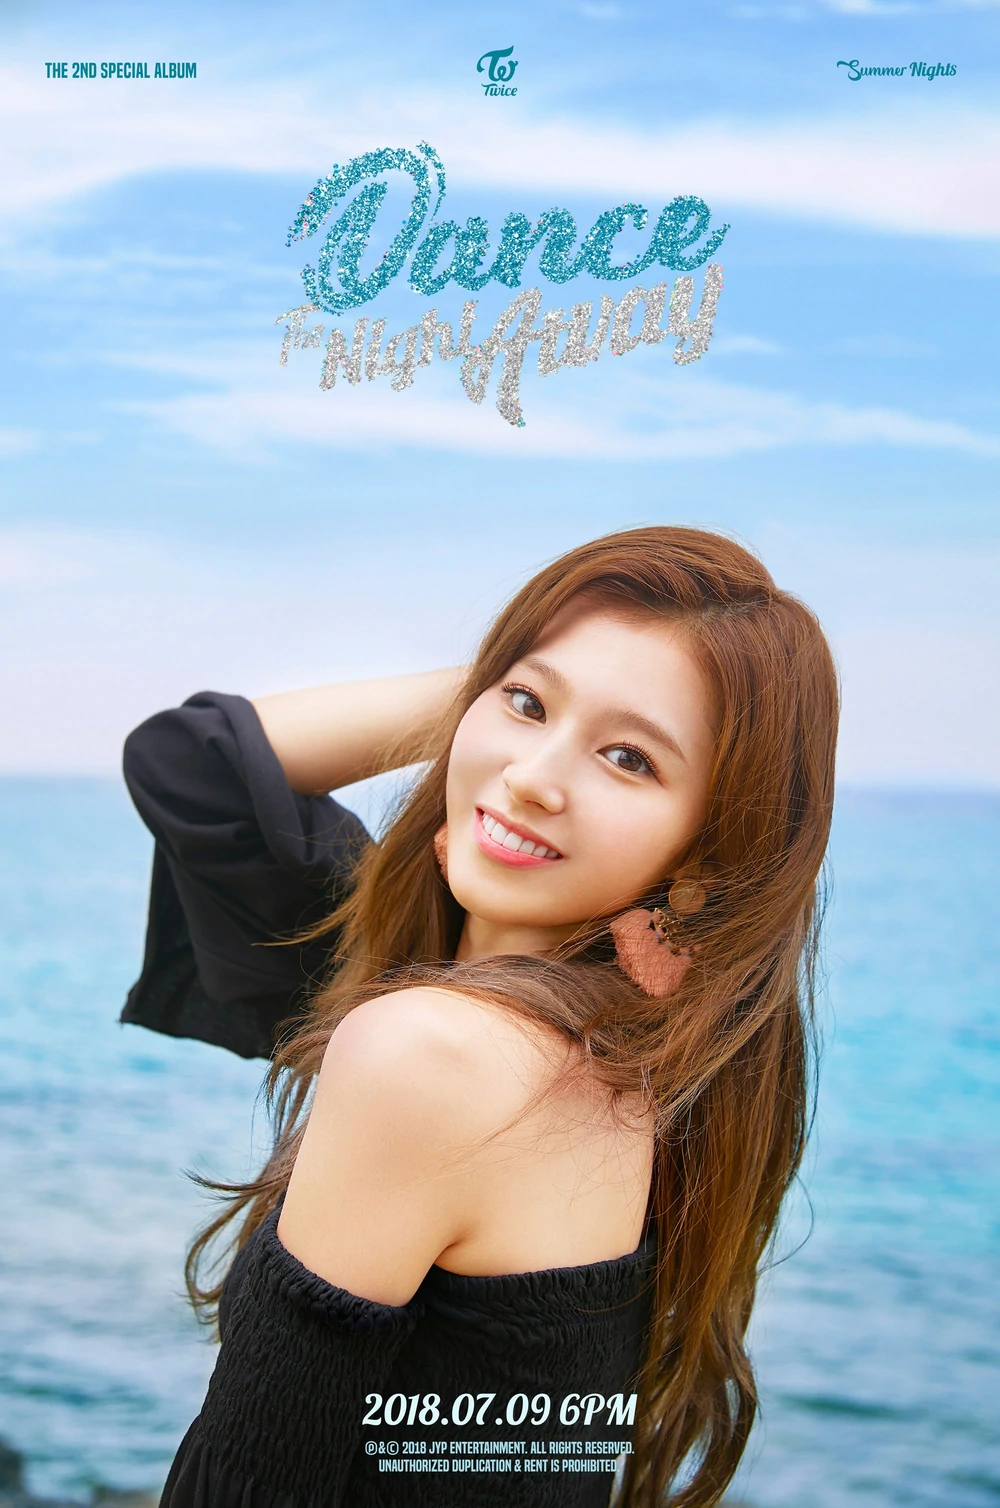 Twice Summer Nights Sana Concept Teaser Picture Image Photo Kpop K-Concept 3